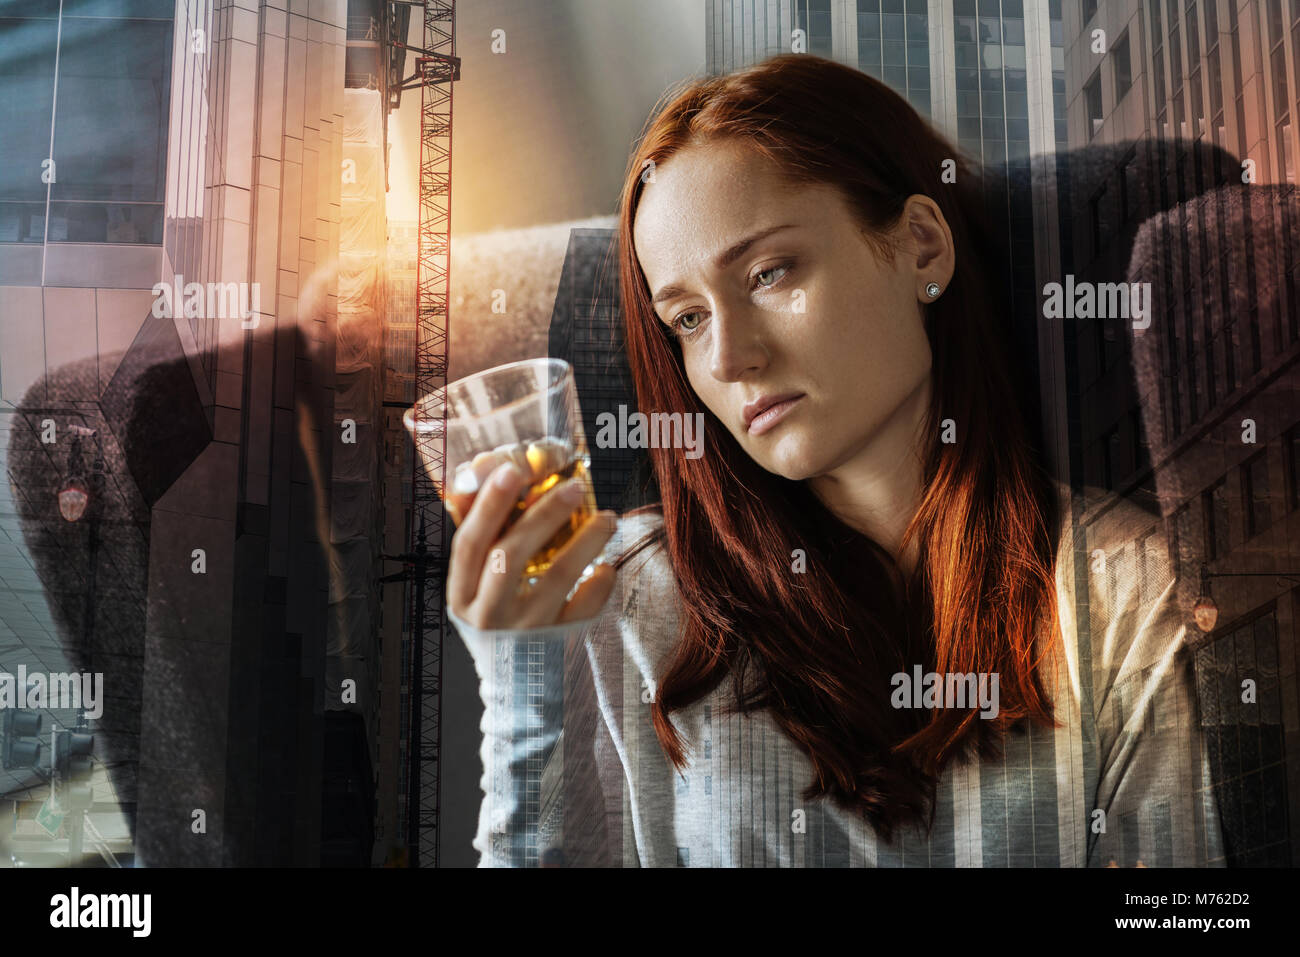 Exhausted depressed woman sitting alone and looking at the glass of alcohol Stock Photo